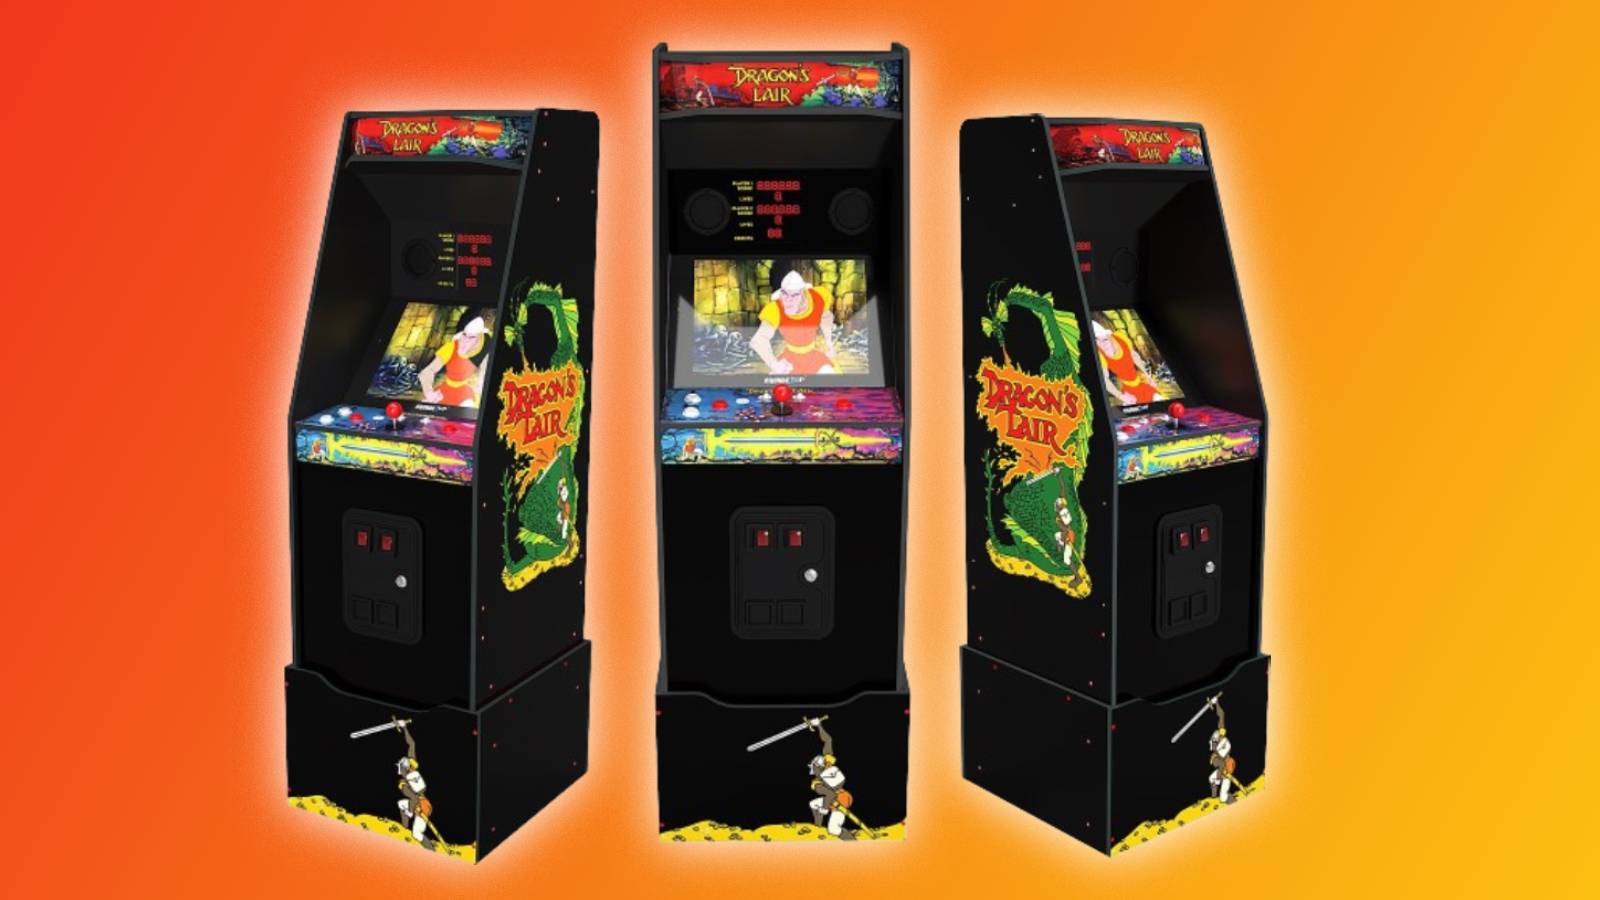 Image of the Arcade1Up Dragon's Lair cabinet from three different angles on a red and orange background.